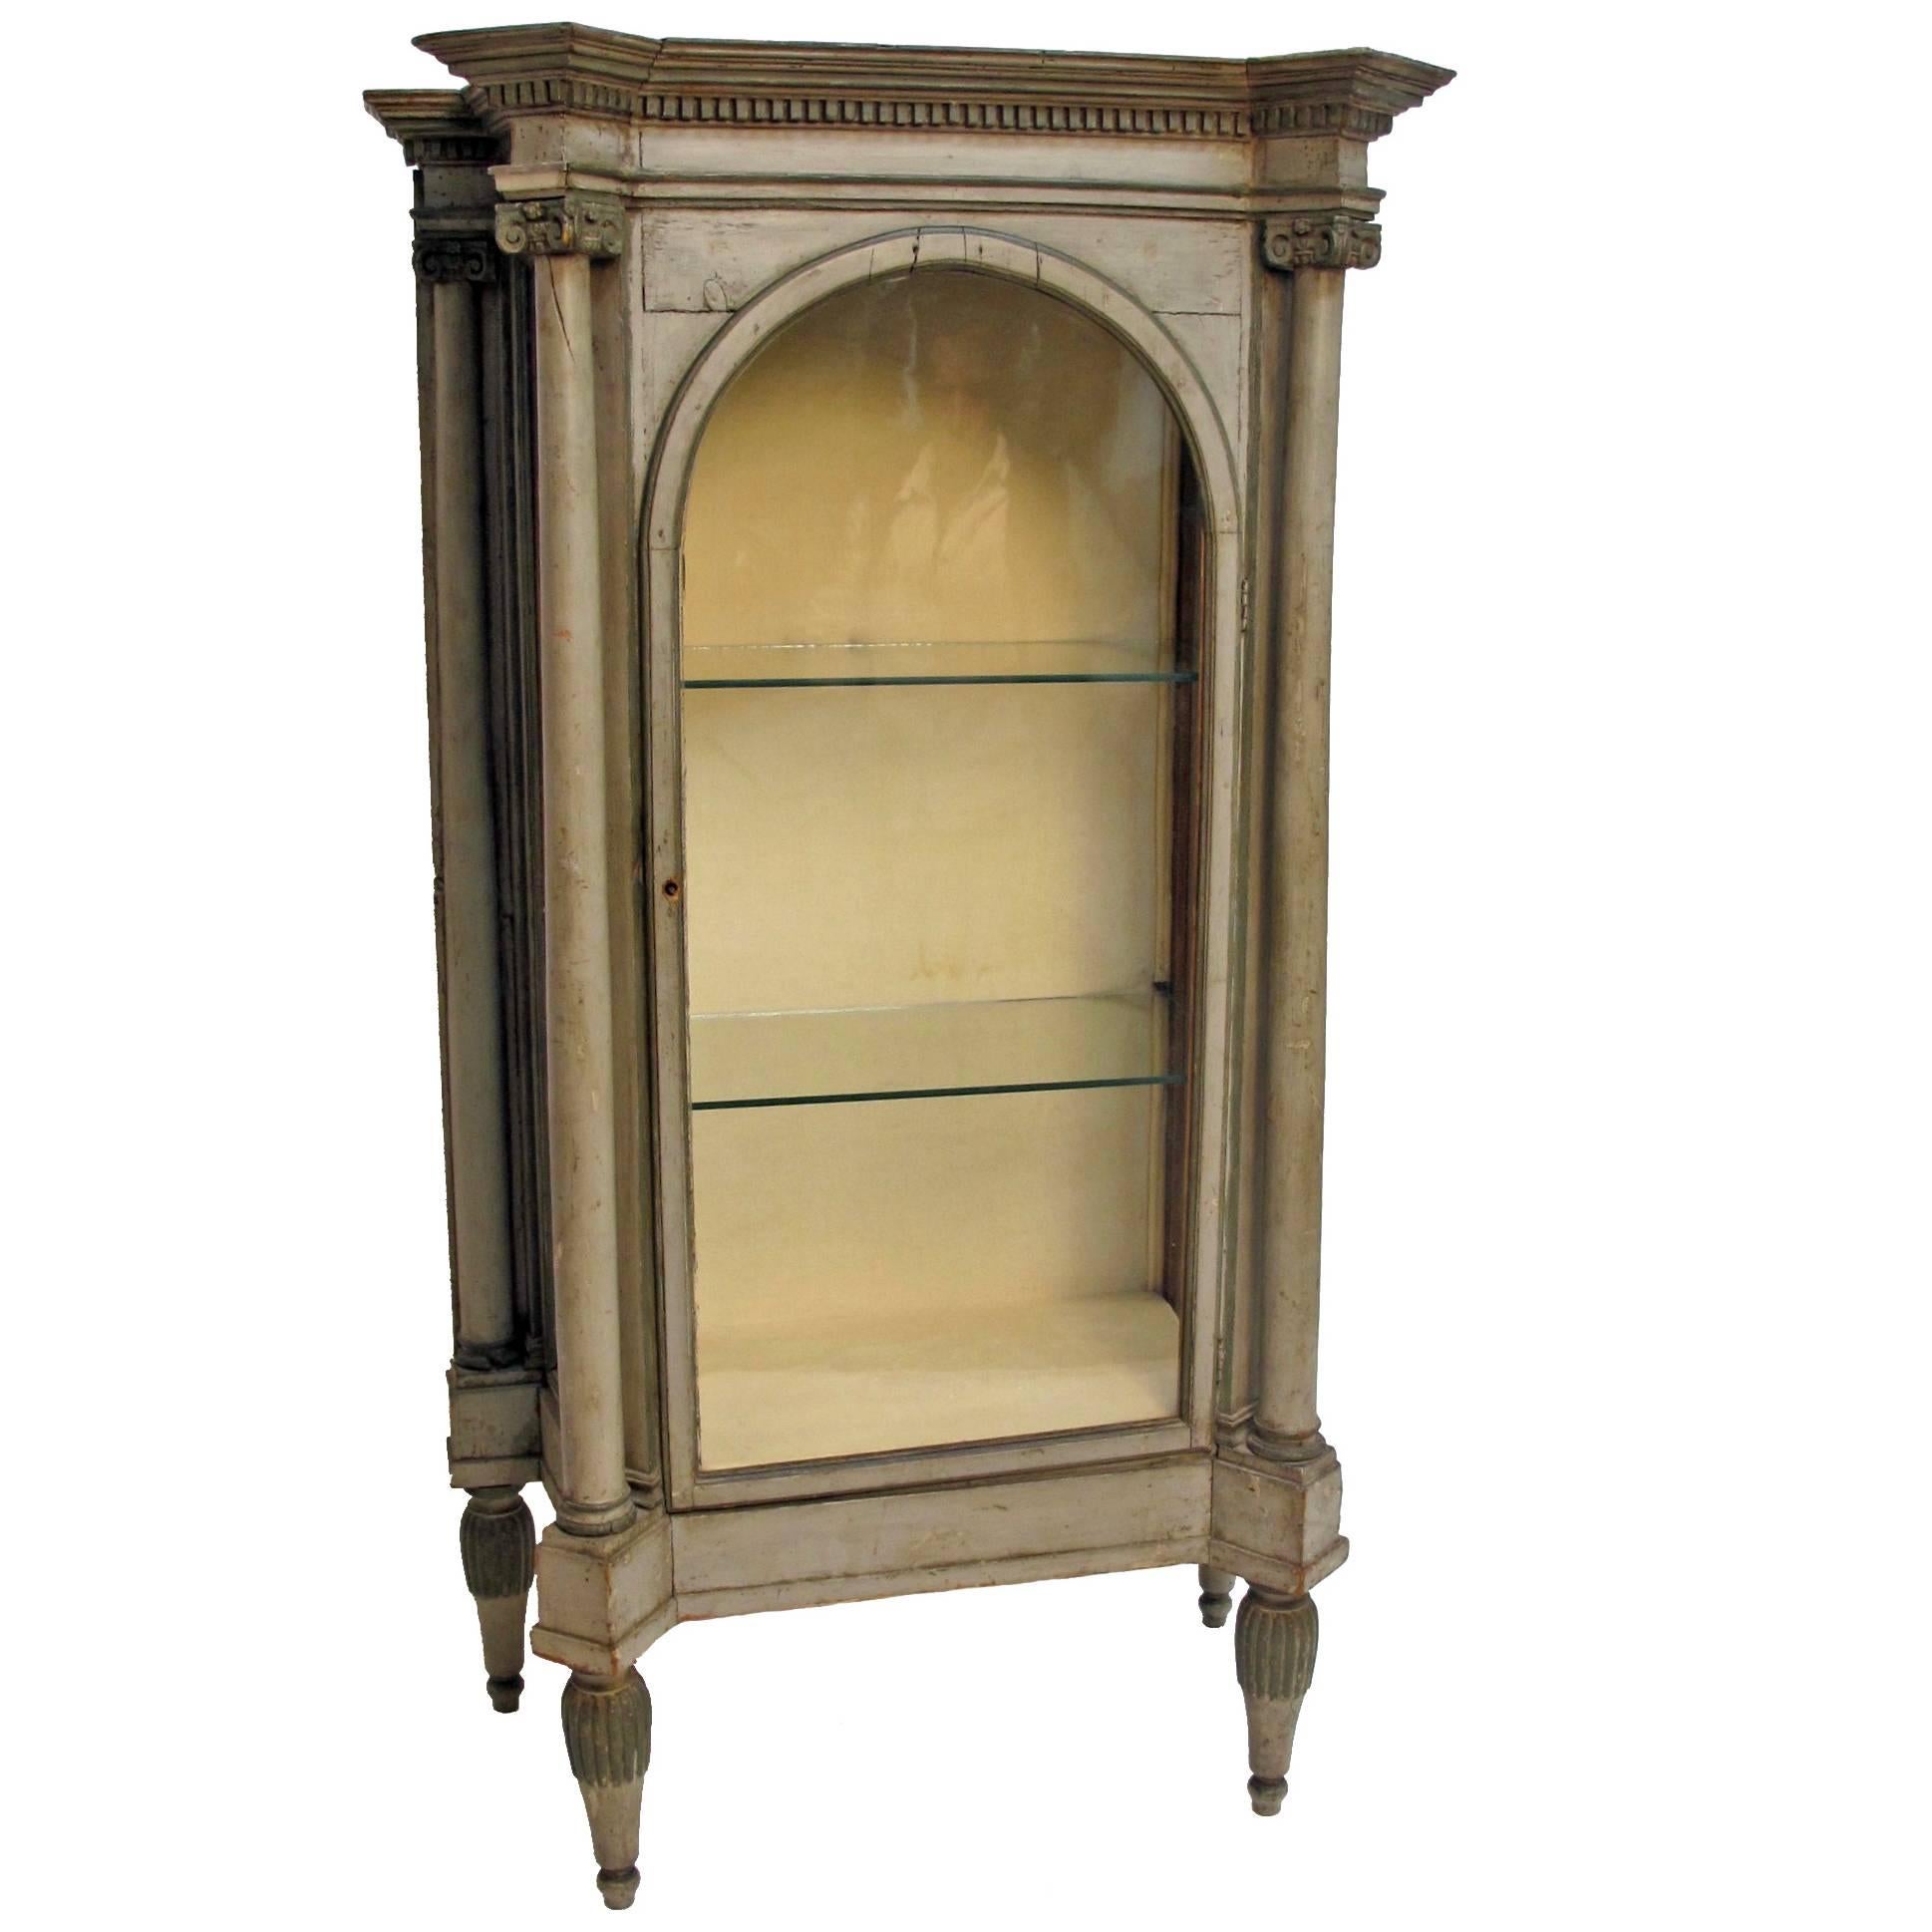 Painted Neoclassical Display Case Swedish